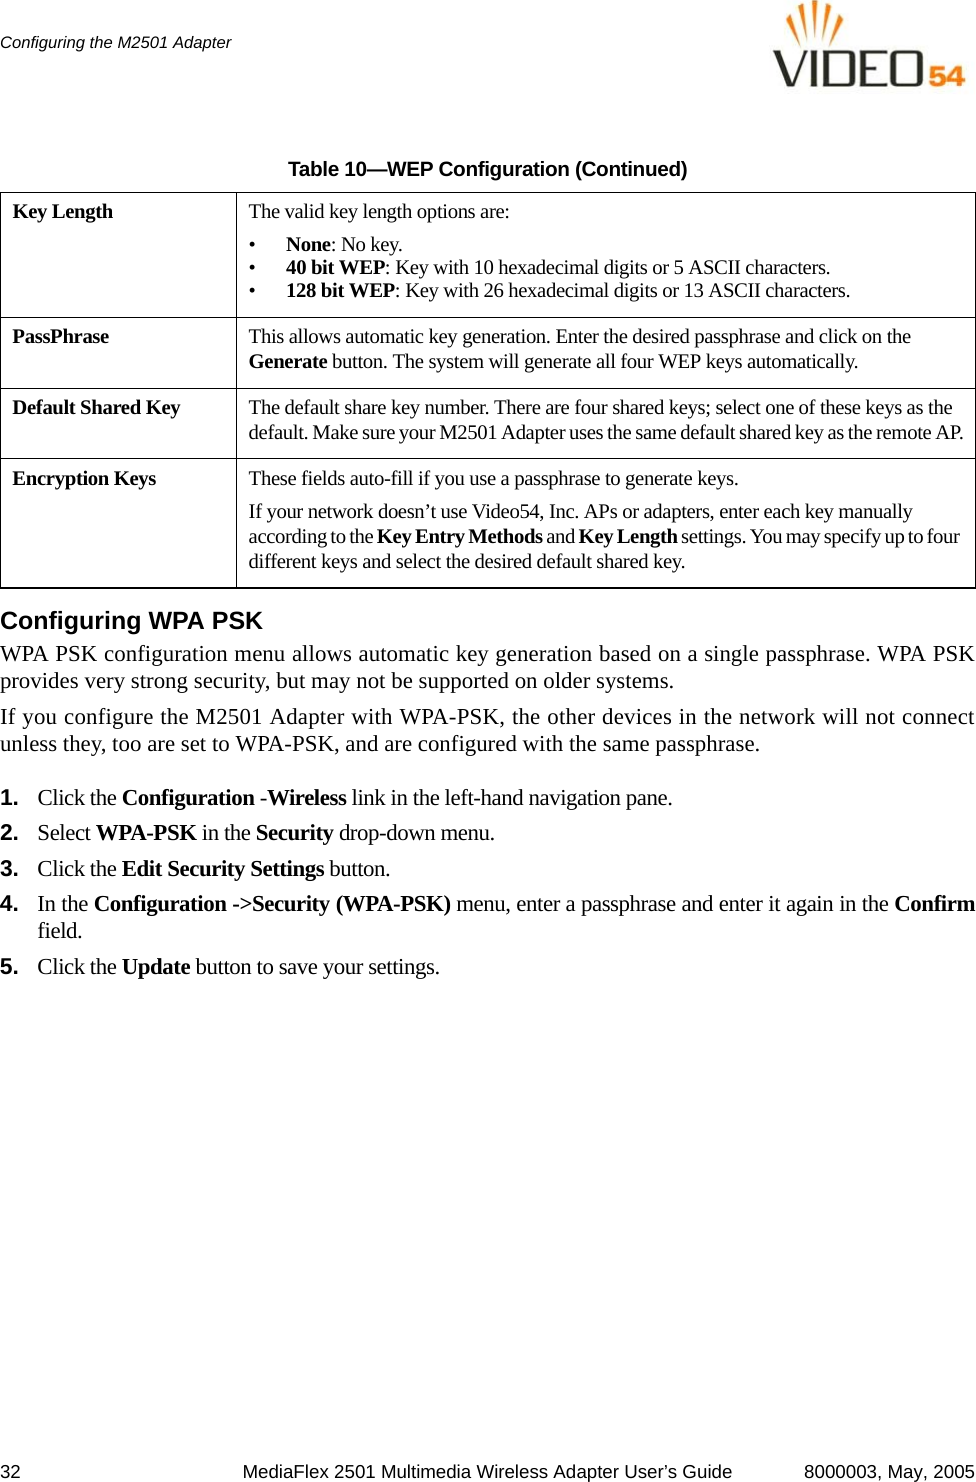 32 MediaFlex 2501 Multimedia Wireless Adapter User’s Guide 8000003, May, 2005Configuring the M2501 Adapter Configuring WPA PSK WPA PSK configuration menu allows automatic key generation based on a single passphrase. WPA PSKprovides very strong security, but may not be supported on older systems.If you configure the M2501 Adapter with WPA-PSK, the other devices in the network will not connectunless they, too are set to WPA-PSK, and are configured with the same passphrase.1. Click the Configuration -Wireless link in the left-hand navigation pane.2. Select WPA-PSK in the Security drop-down menu.3. Click the Edit Security Settings button.4. In the Configuration -&gt;Security (WPA-PSK) menu, enter a passphrase and enter it again in the Confirmfield. 5. Click the Update button to save your settings.Key Length The valid key length options are: •None: No key.•40 bit WEP: Key with 10 hexadecimal digits or 5 ASCII characters.•128 bit WEP: Key with 26 hexadecimal digits or 13 ASCII characters.PassPhrase This allows automatic key generation. Enter the desired passphrase and click on the Generate button. The system will generate all four WEP keys automatically.Default Shared Key The default share key number. There are four shared keys; select one of these keys as the default. Make sure your M2501 Adapter uses the same default shared key as the remote AP.Encryption Keys These fields auto-fill if you use a passphrase to generate keys. If your network doesn’t use Video54, Inc. APs or adapters, enter each key manually according to the Key Entry Methods and Key Length settings. You may specify up to four different keys and select the desired default shared key.Table 10—WEP Configuration (Continued)